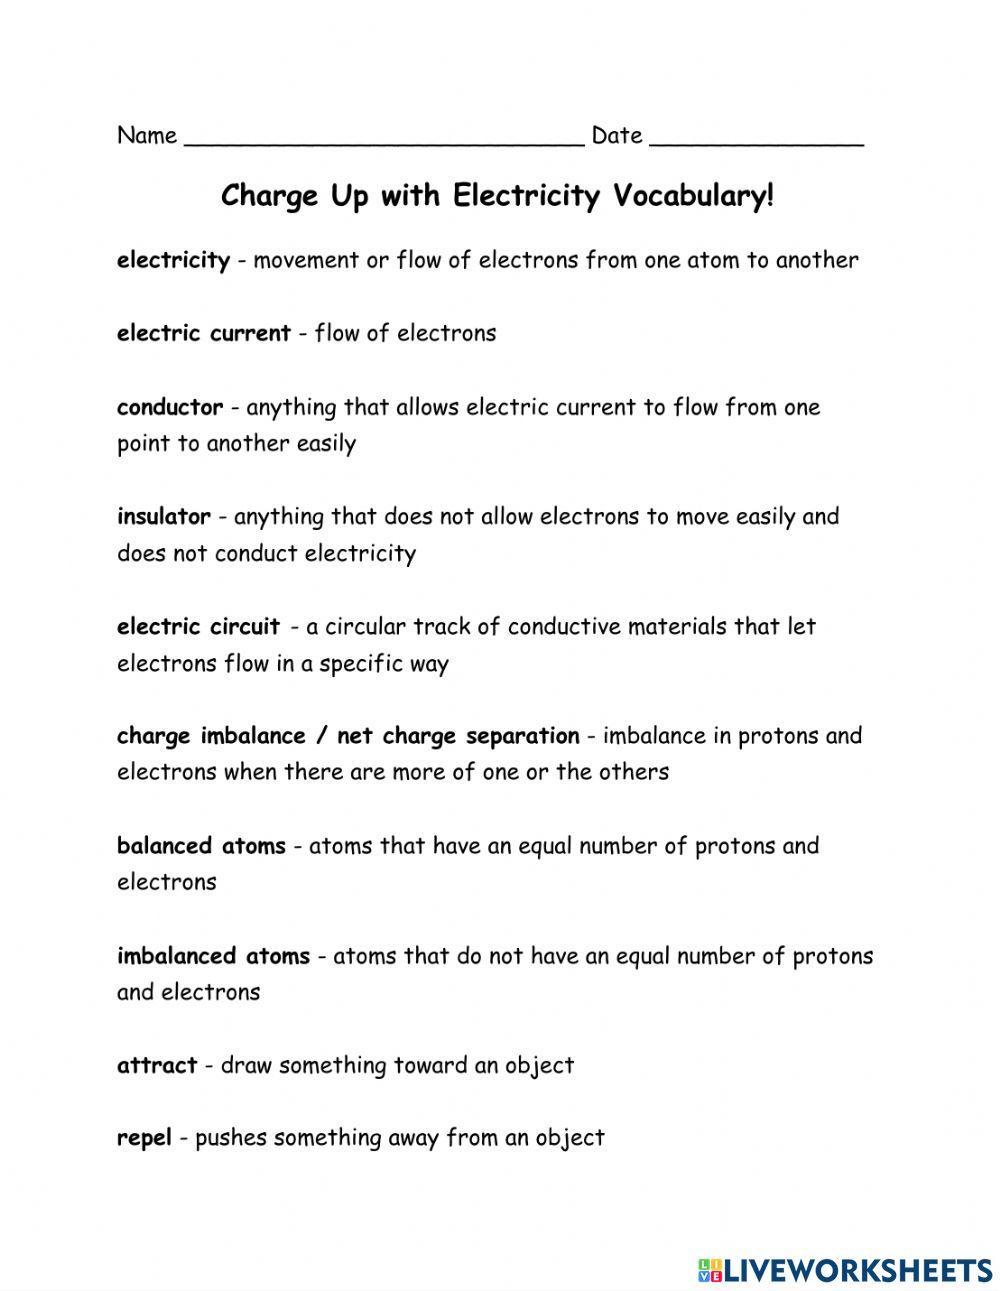 Electricity Information and Vocabulary